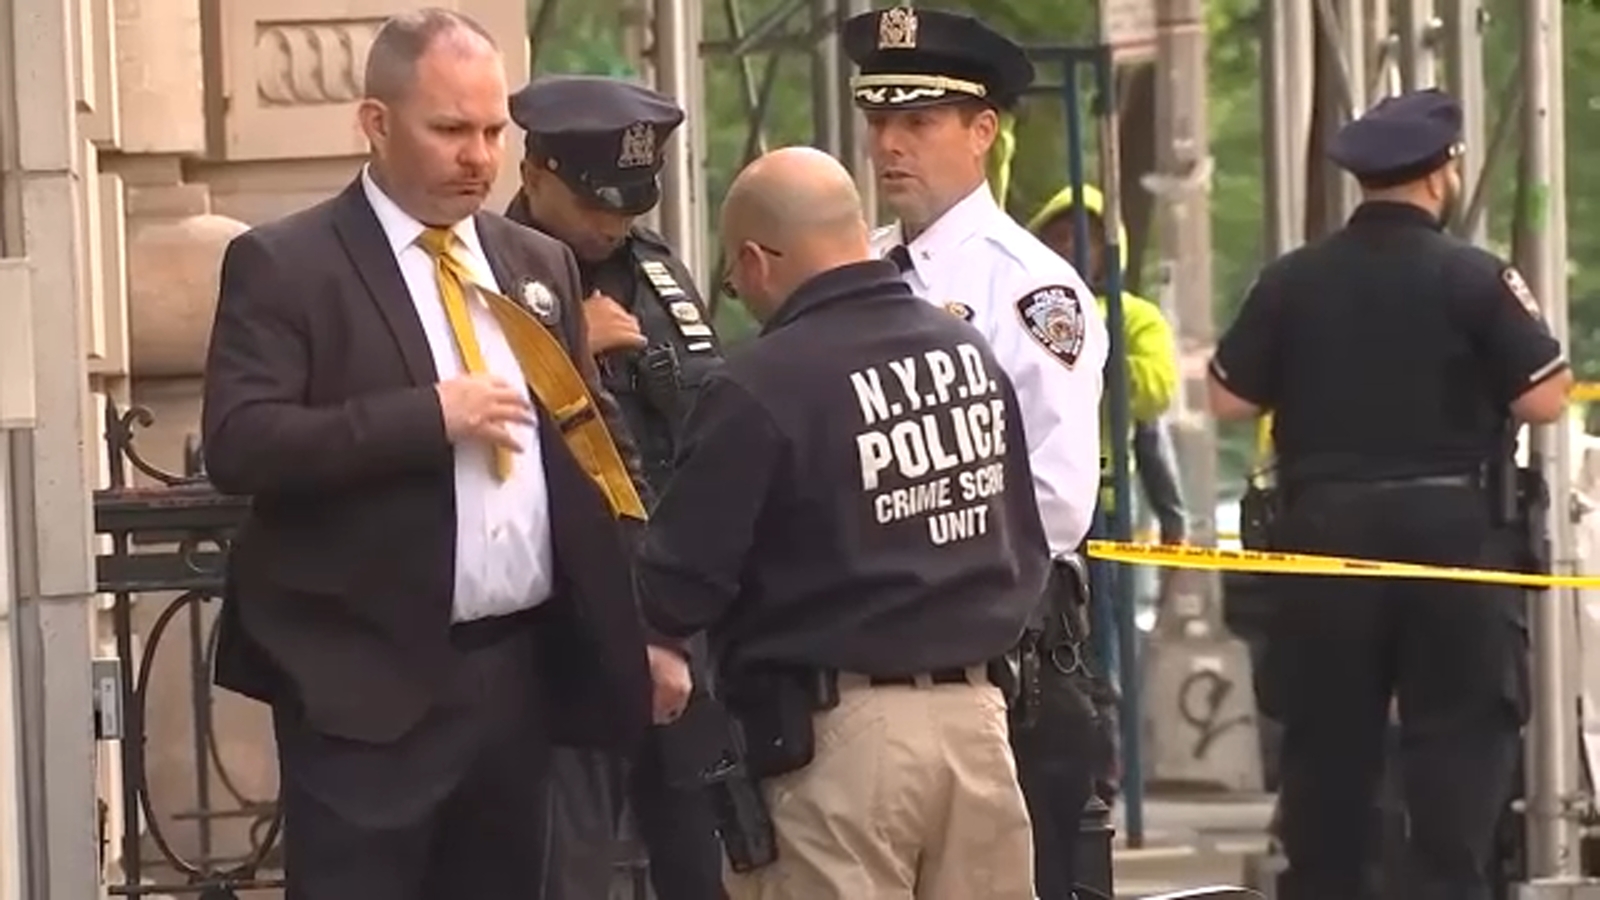 NYPD police shooting: Man critically injured after police shooting in Chelsea, NYC [Video]